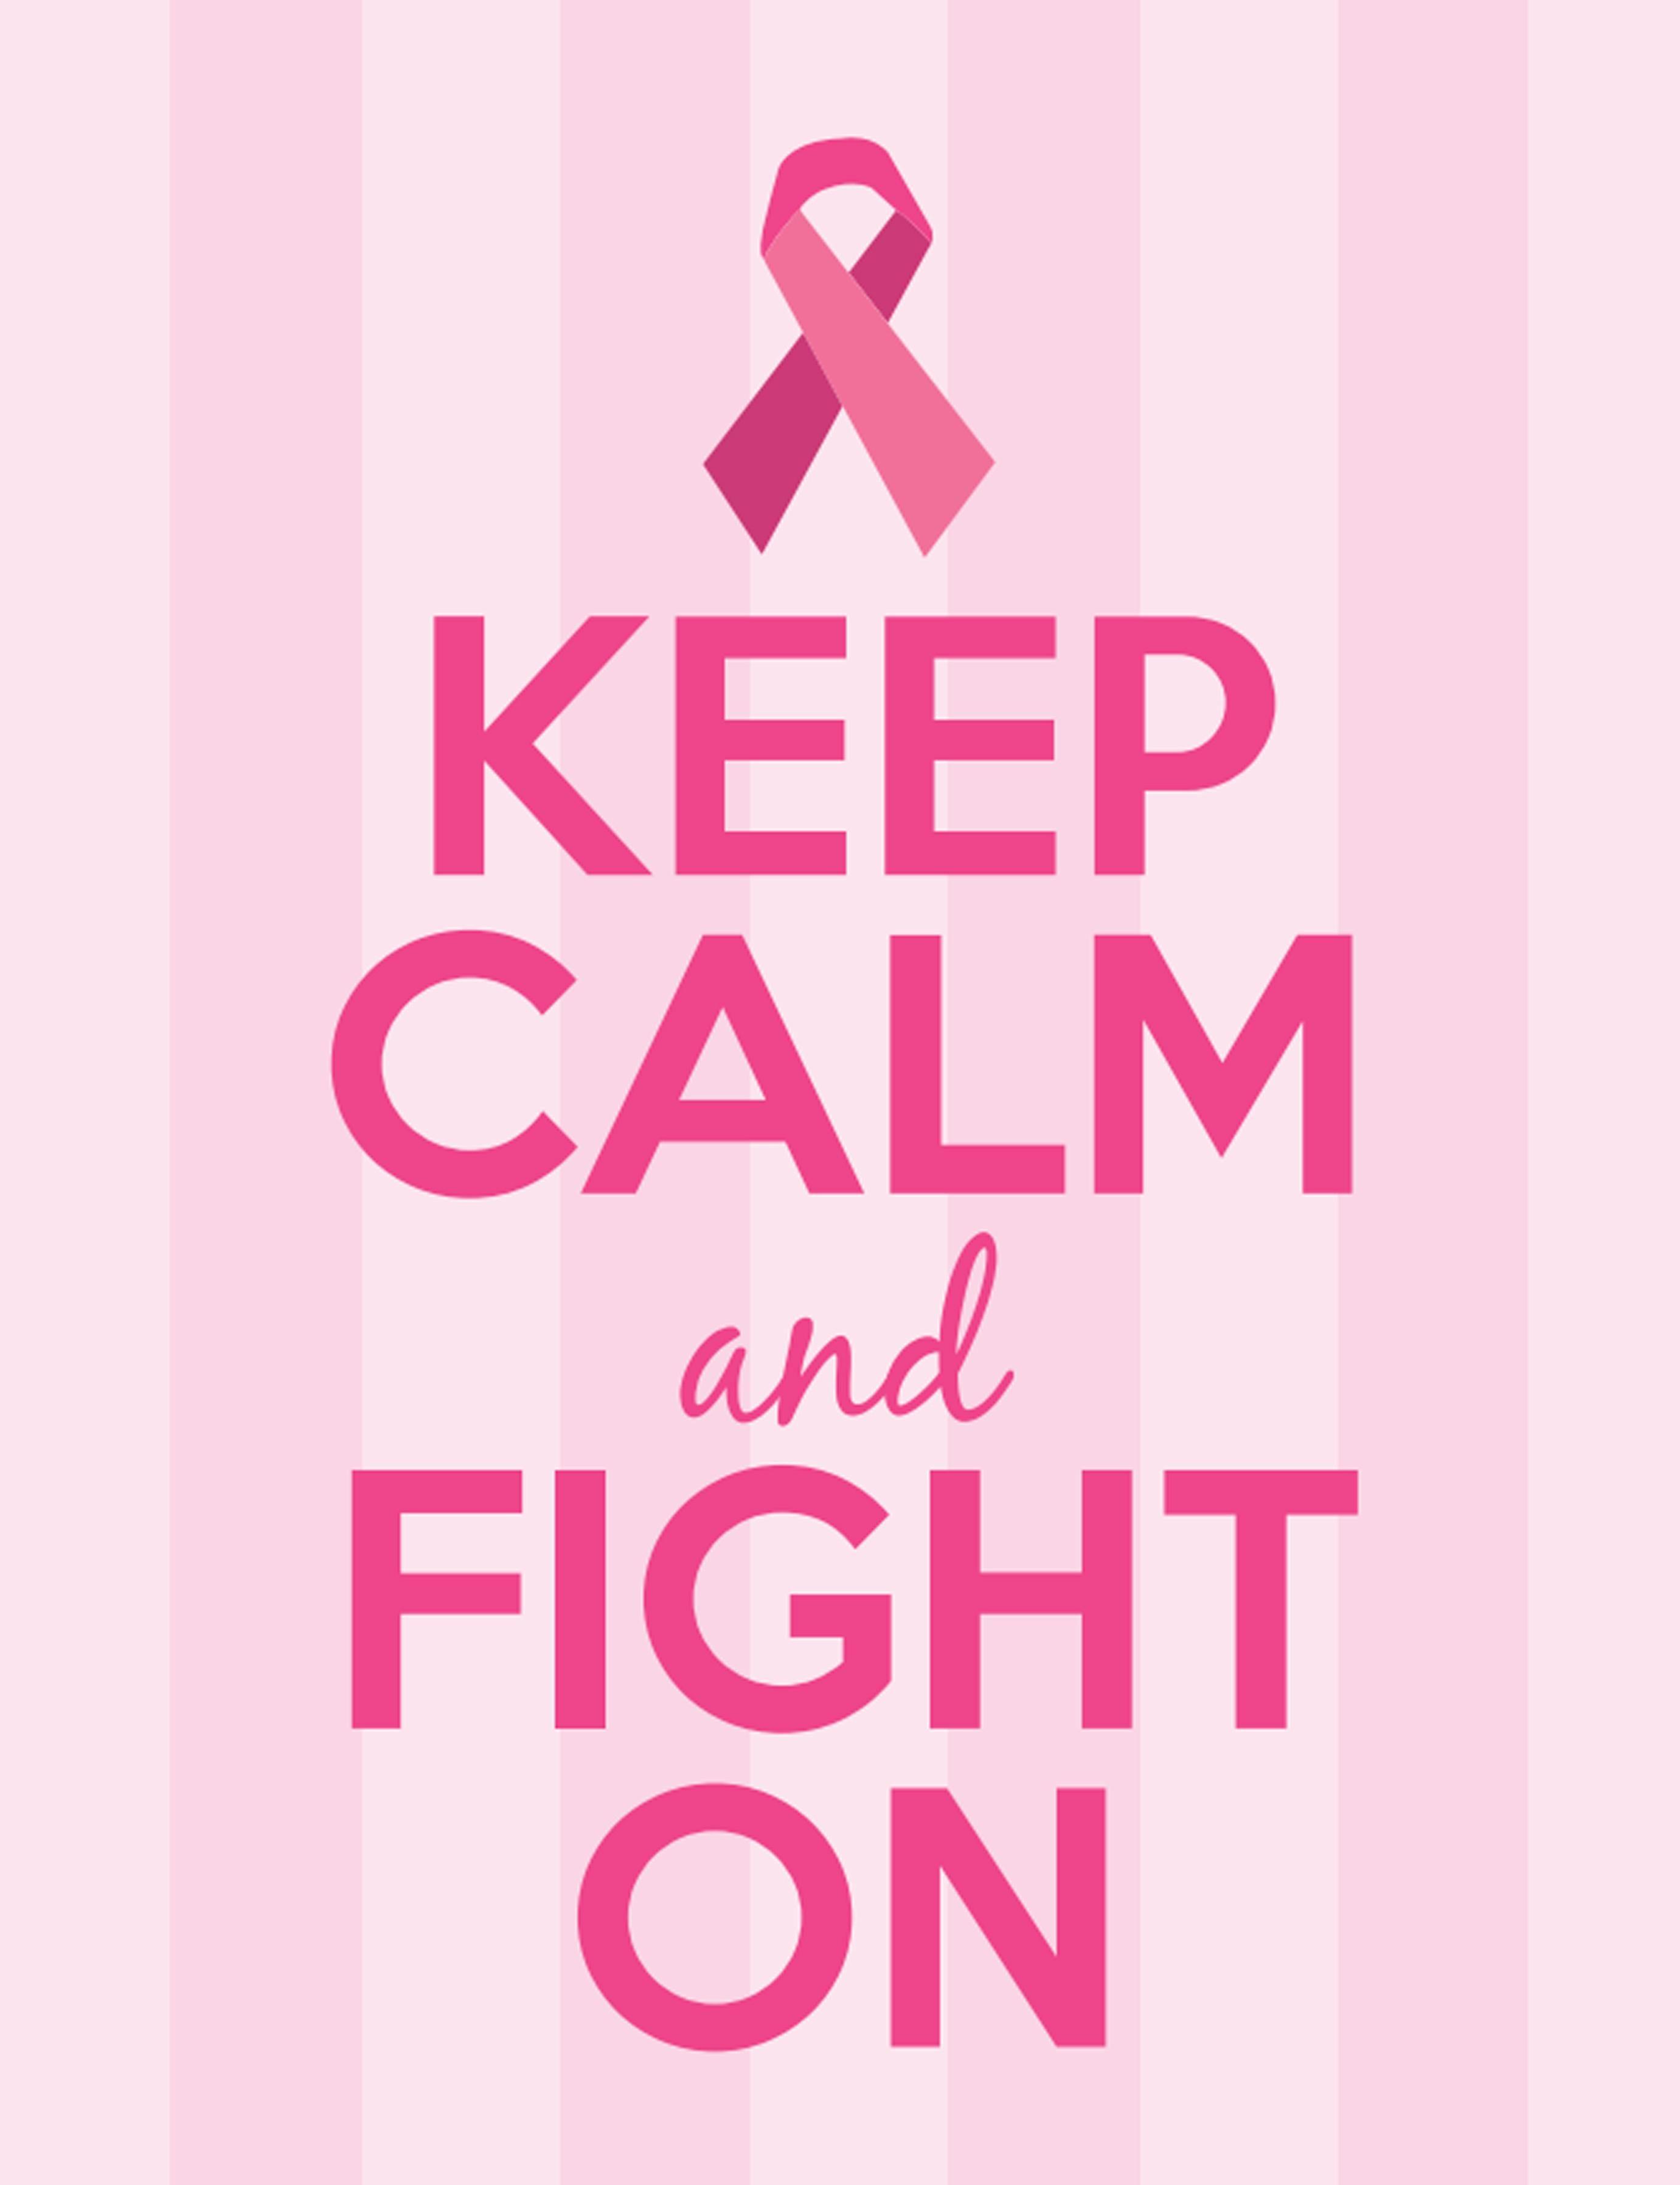 Breast Cancer Awareness Backgrounds 25 images